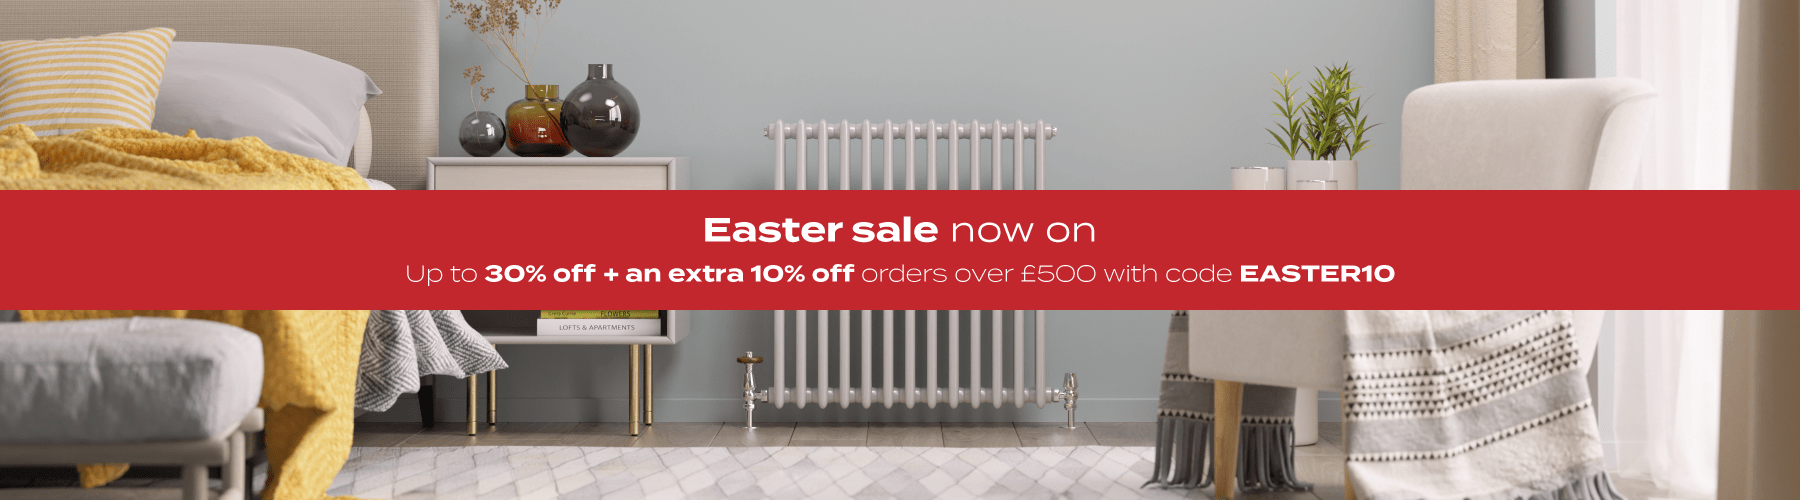  Easter sale now on | up to 30% off hundreds of radiators + an extra 10% off orders over £500 with code SAVE500 